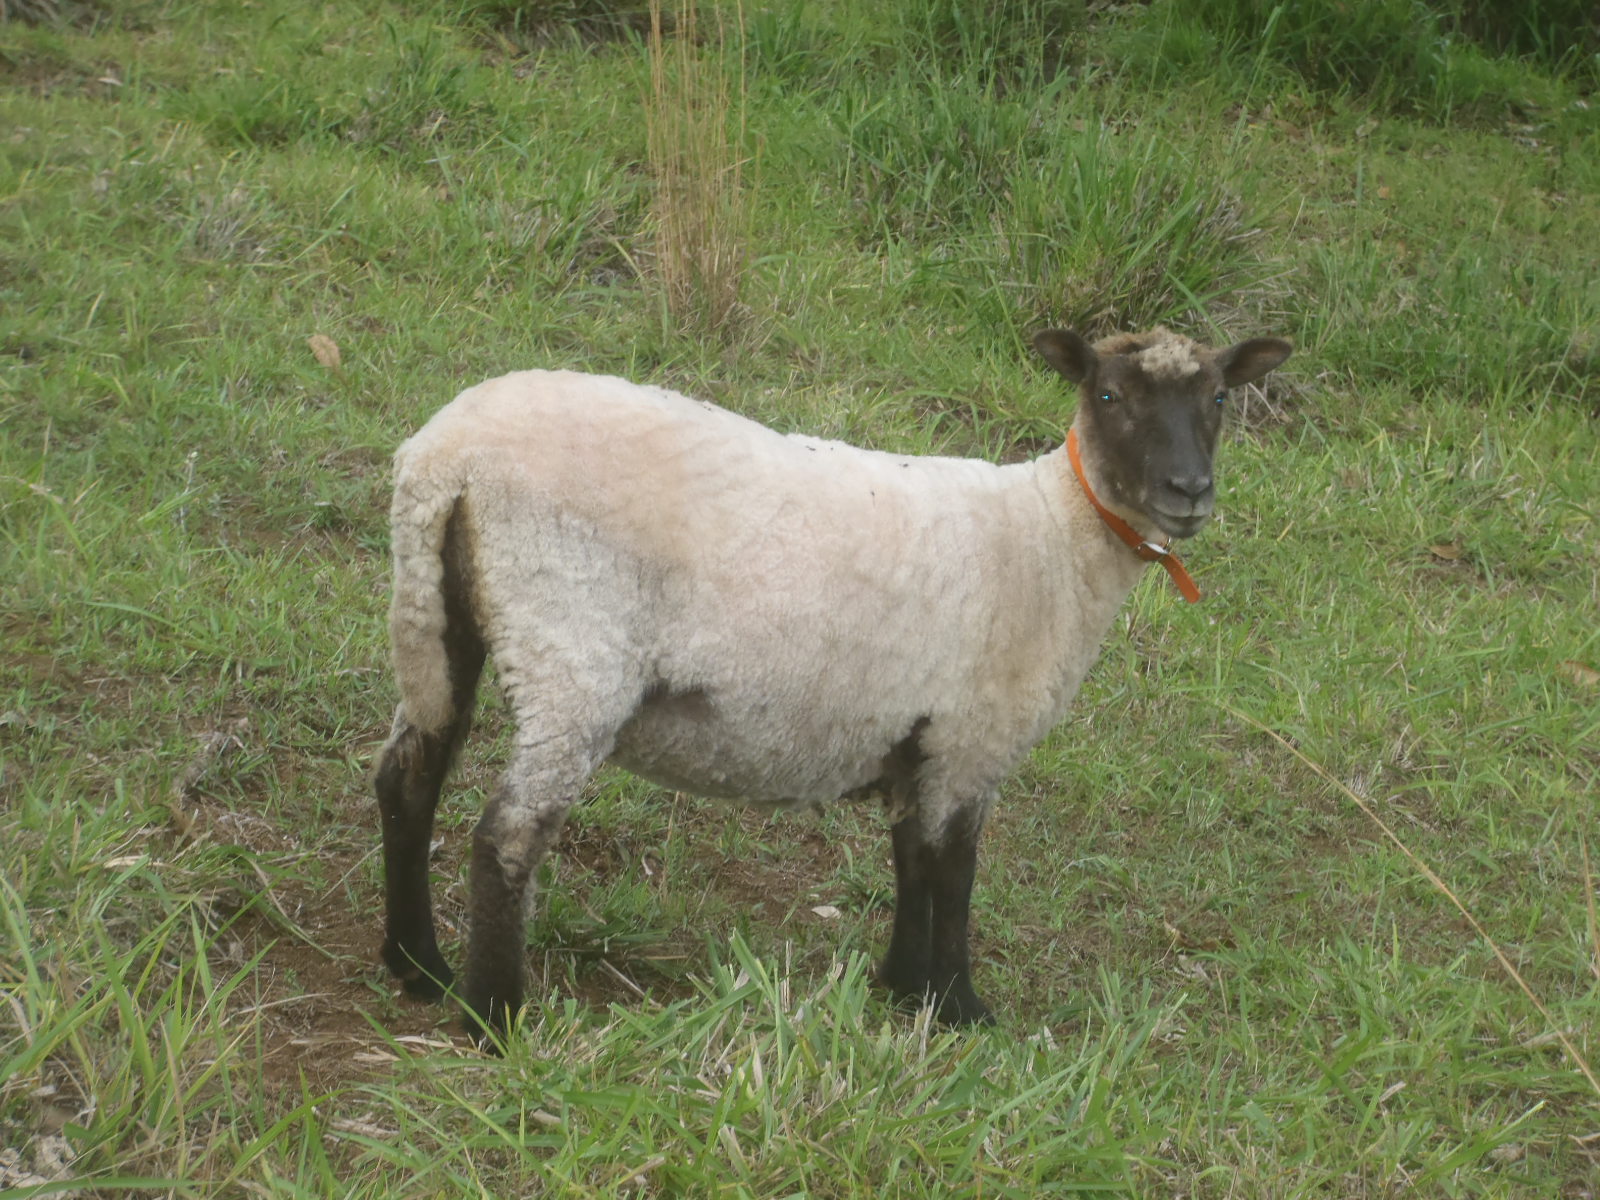 A photo of Fern after she was sheared.